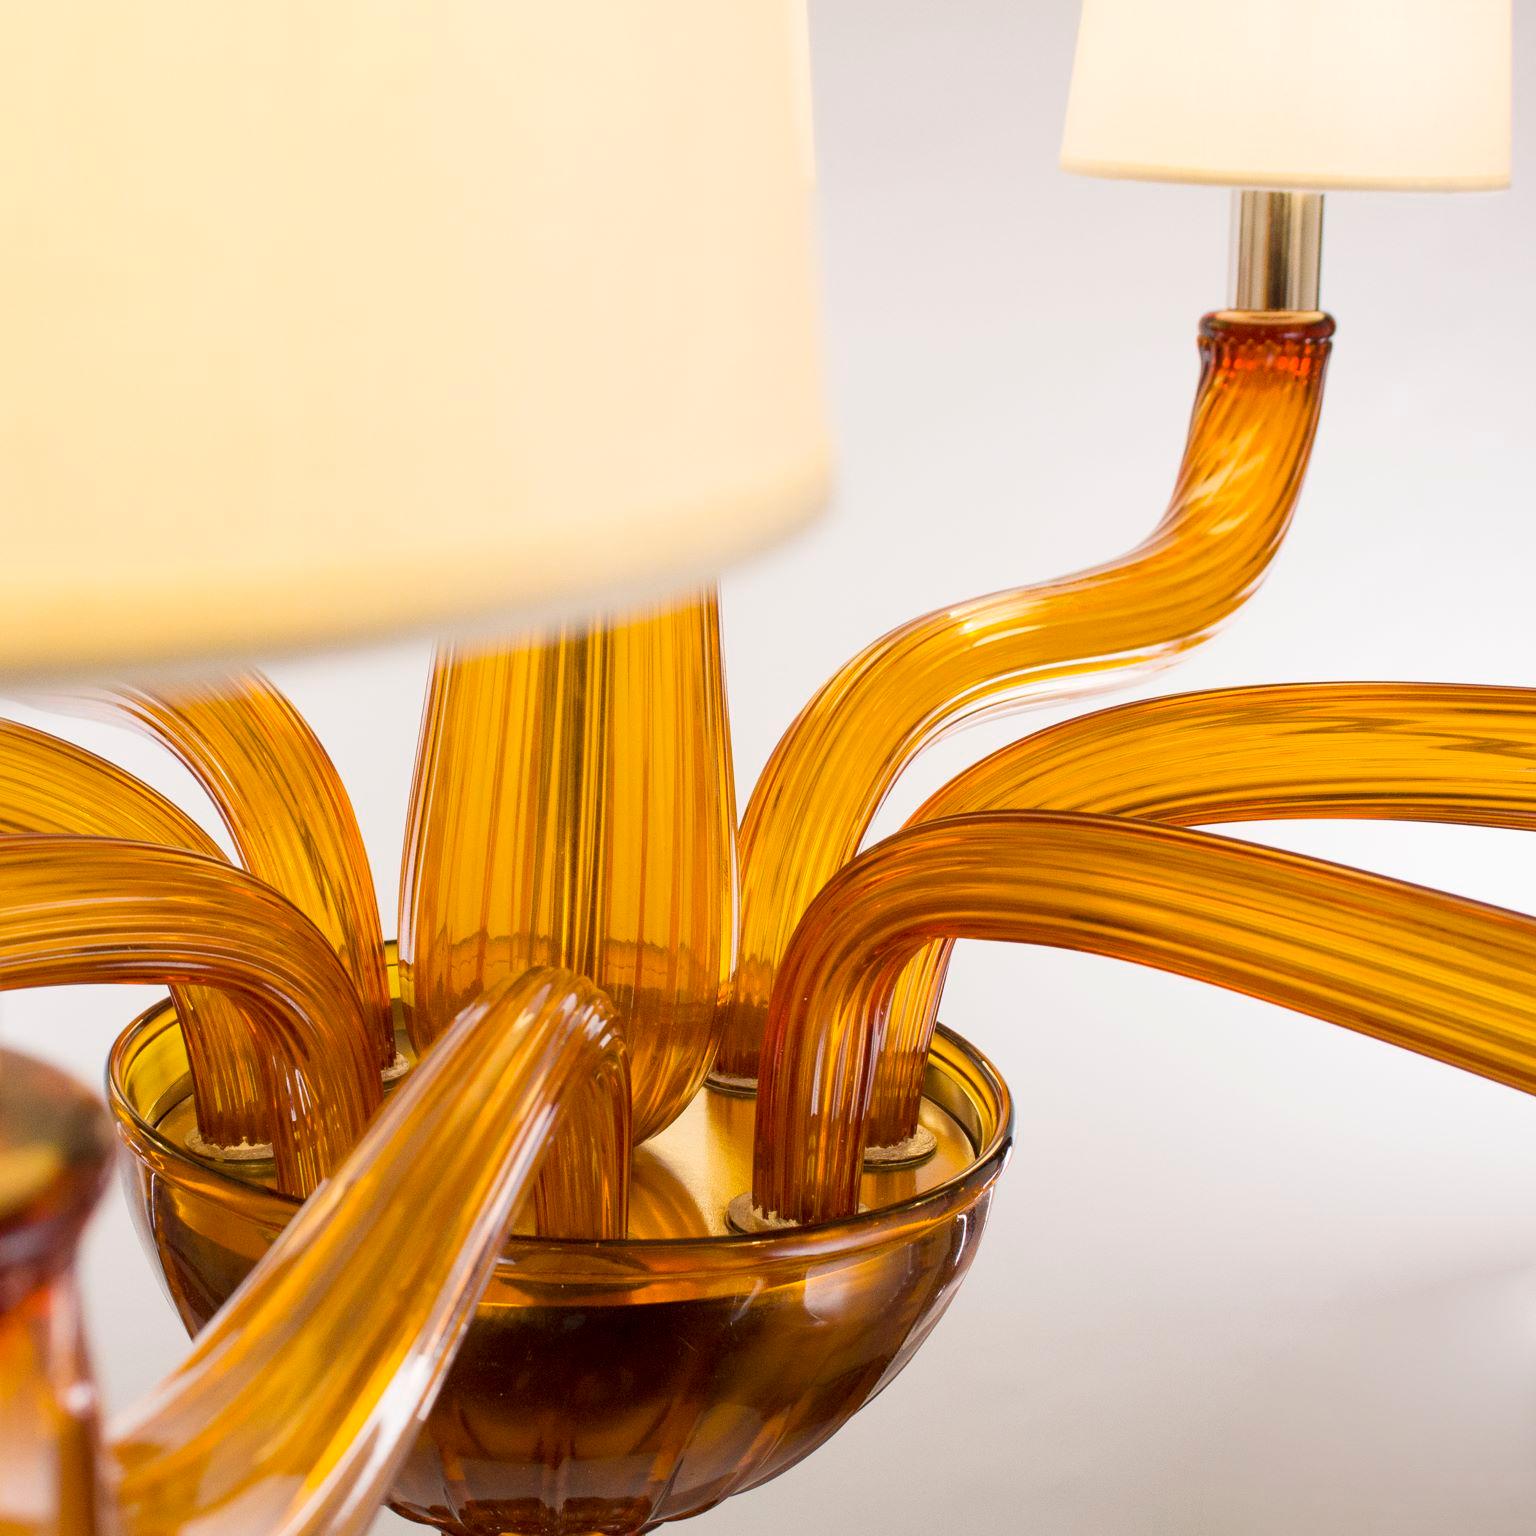 Coco chandelier 8  light artistic amber Murano glass, white lampshades by Multiforme
The glass chandeliers Coco collection takes inspiration from Coco Chanel, the revolutionary woman that has changed the fashion industry during the 1920s.
In